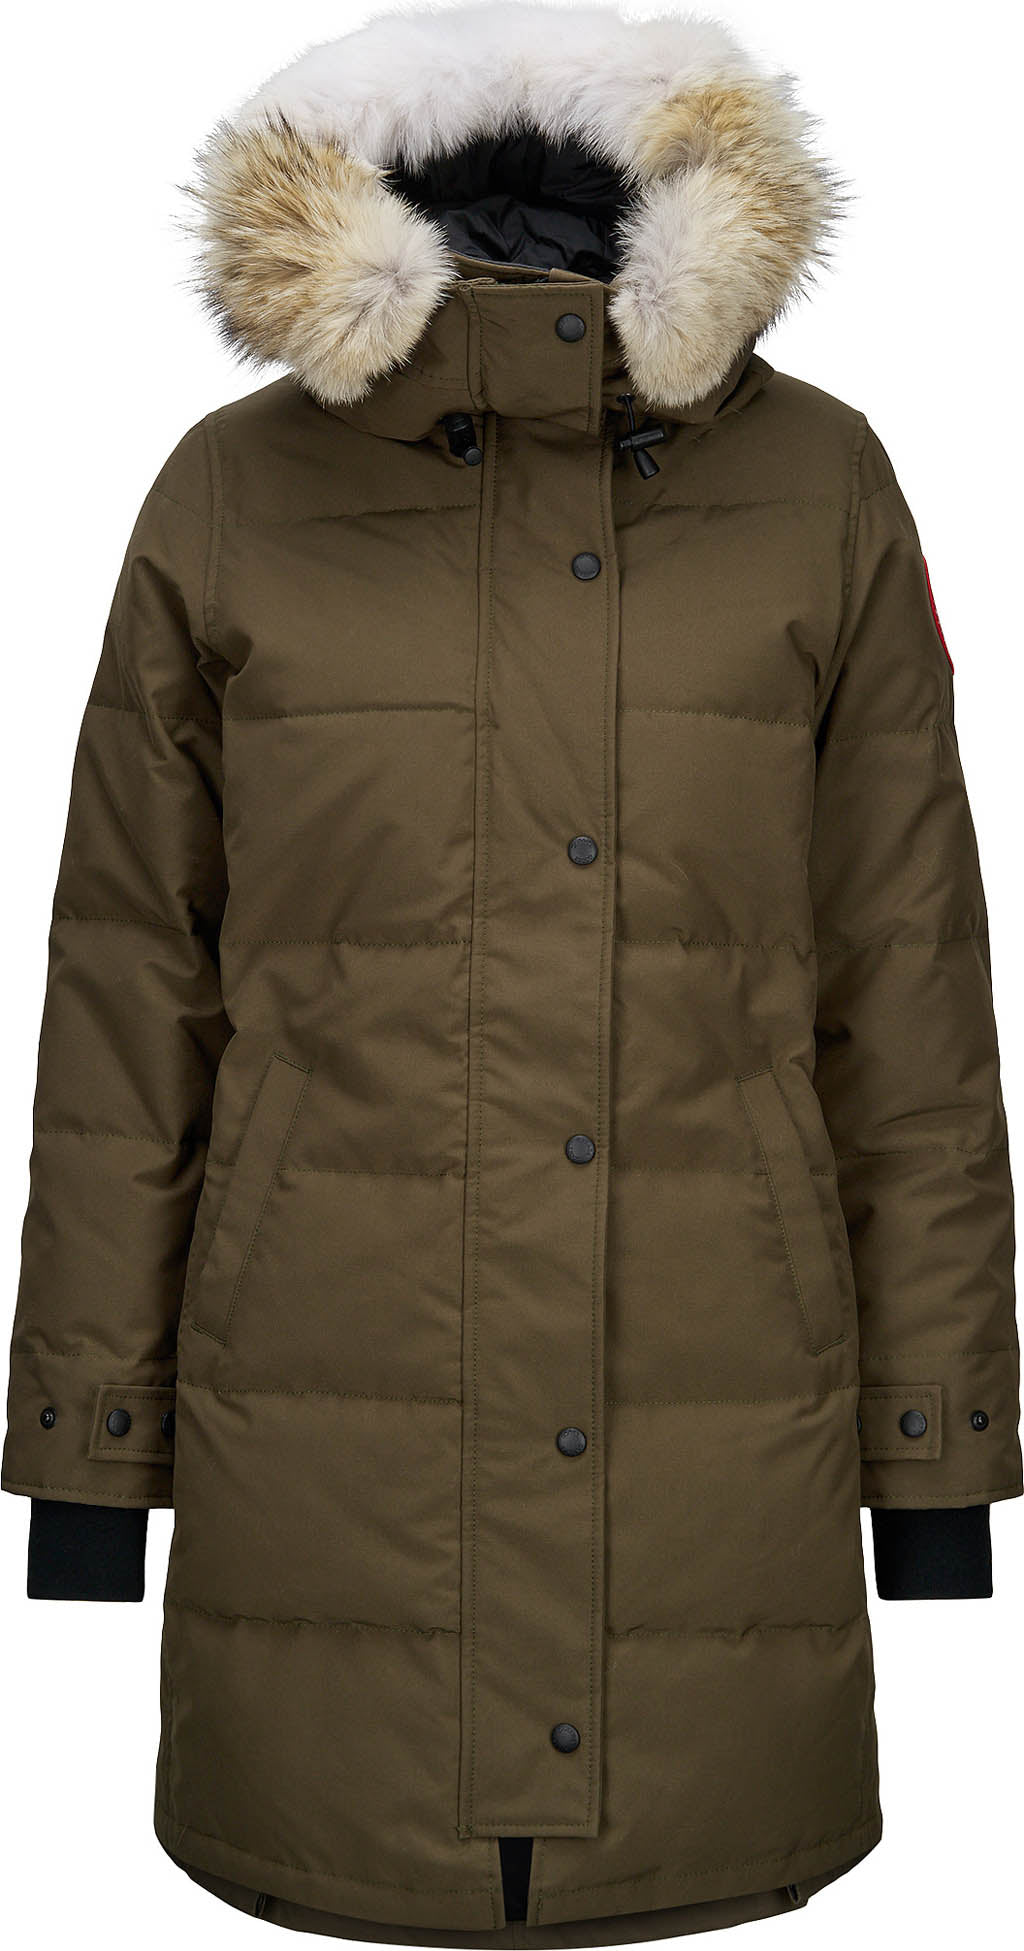 Canada Goose Shelburne Review, Kelly in the City